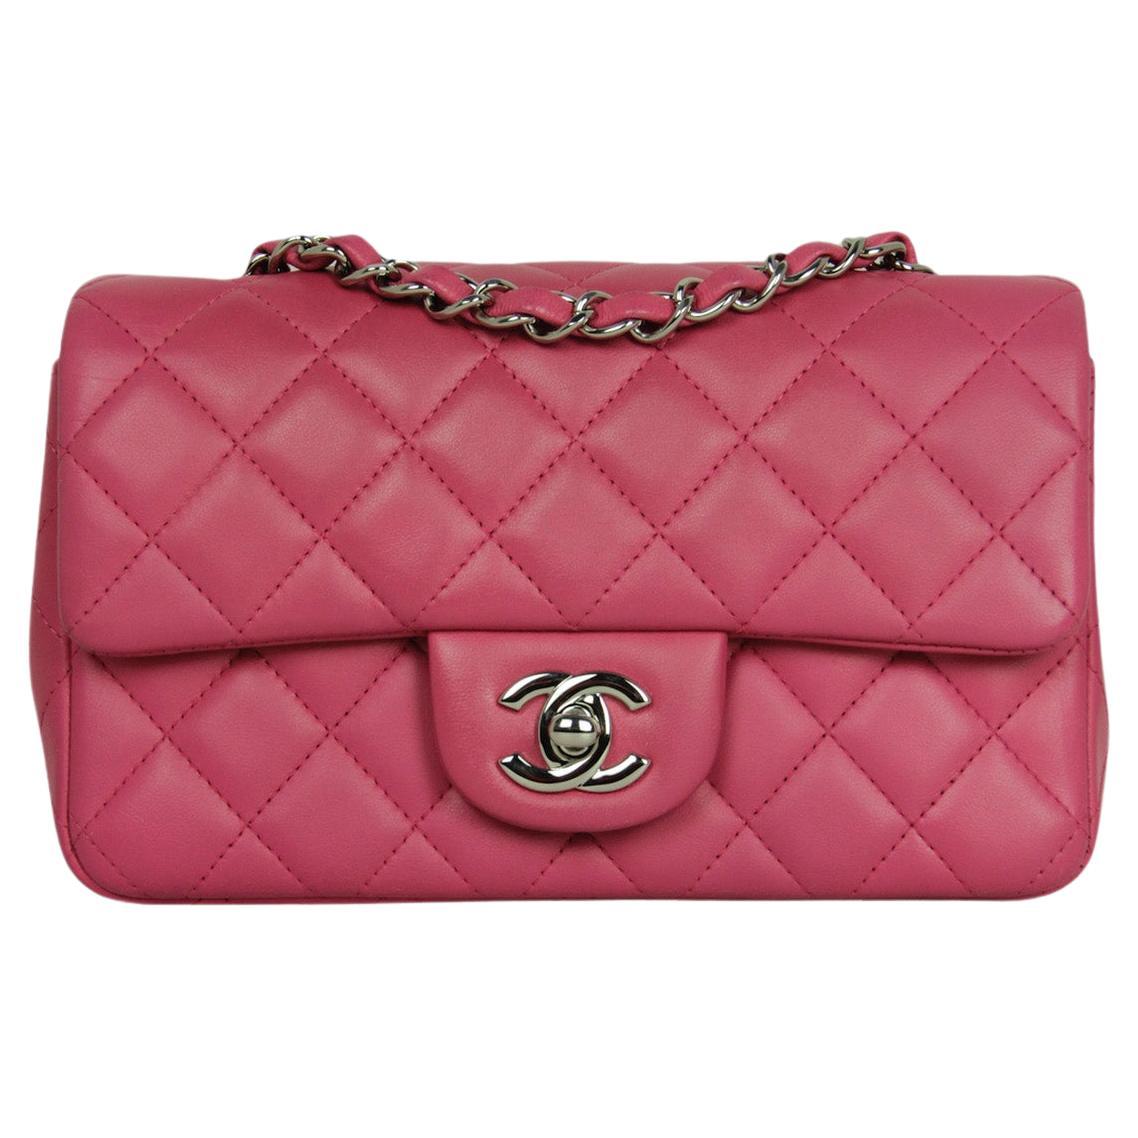 Chanel Pink Lambskin Leather Quilted Rectangular Mini Flap Bag